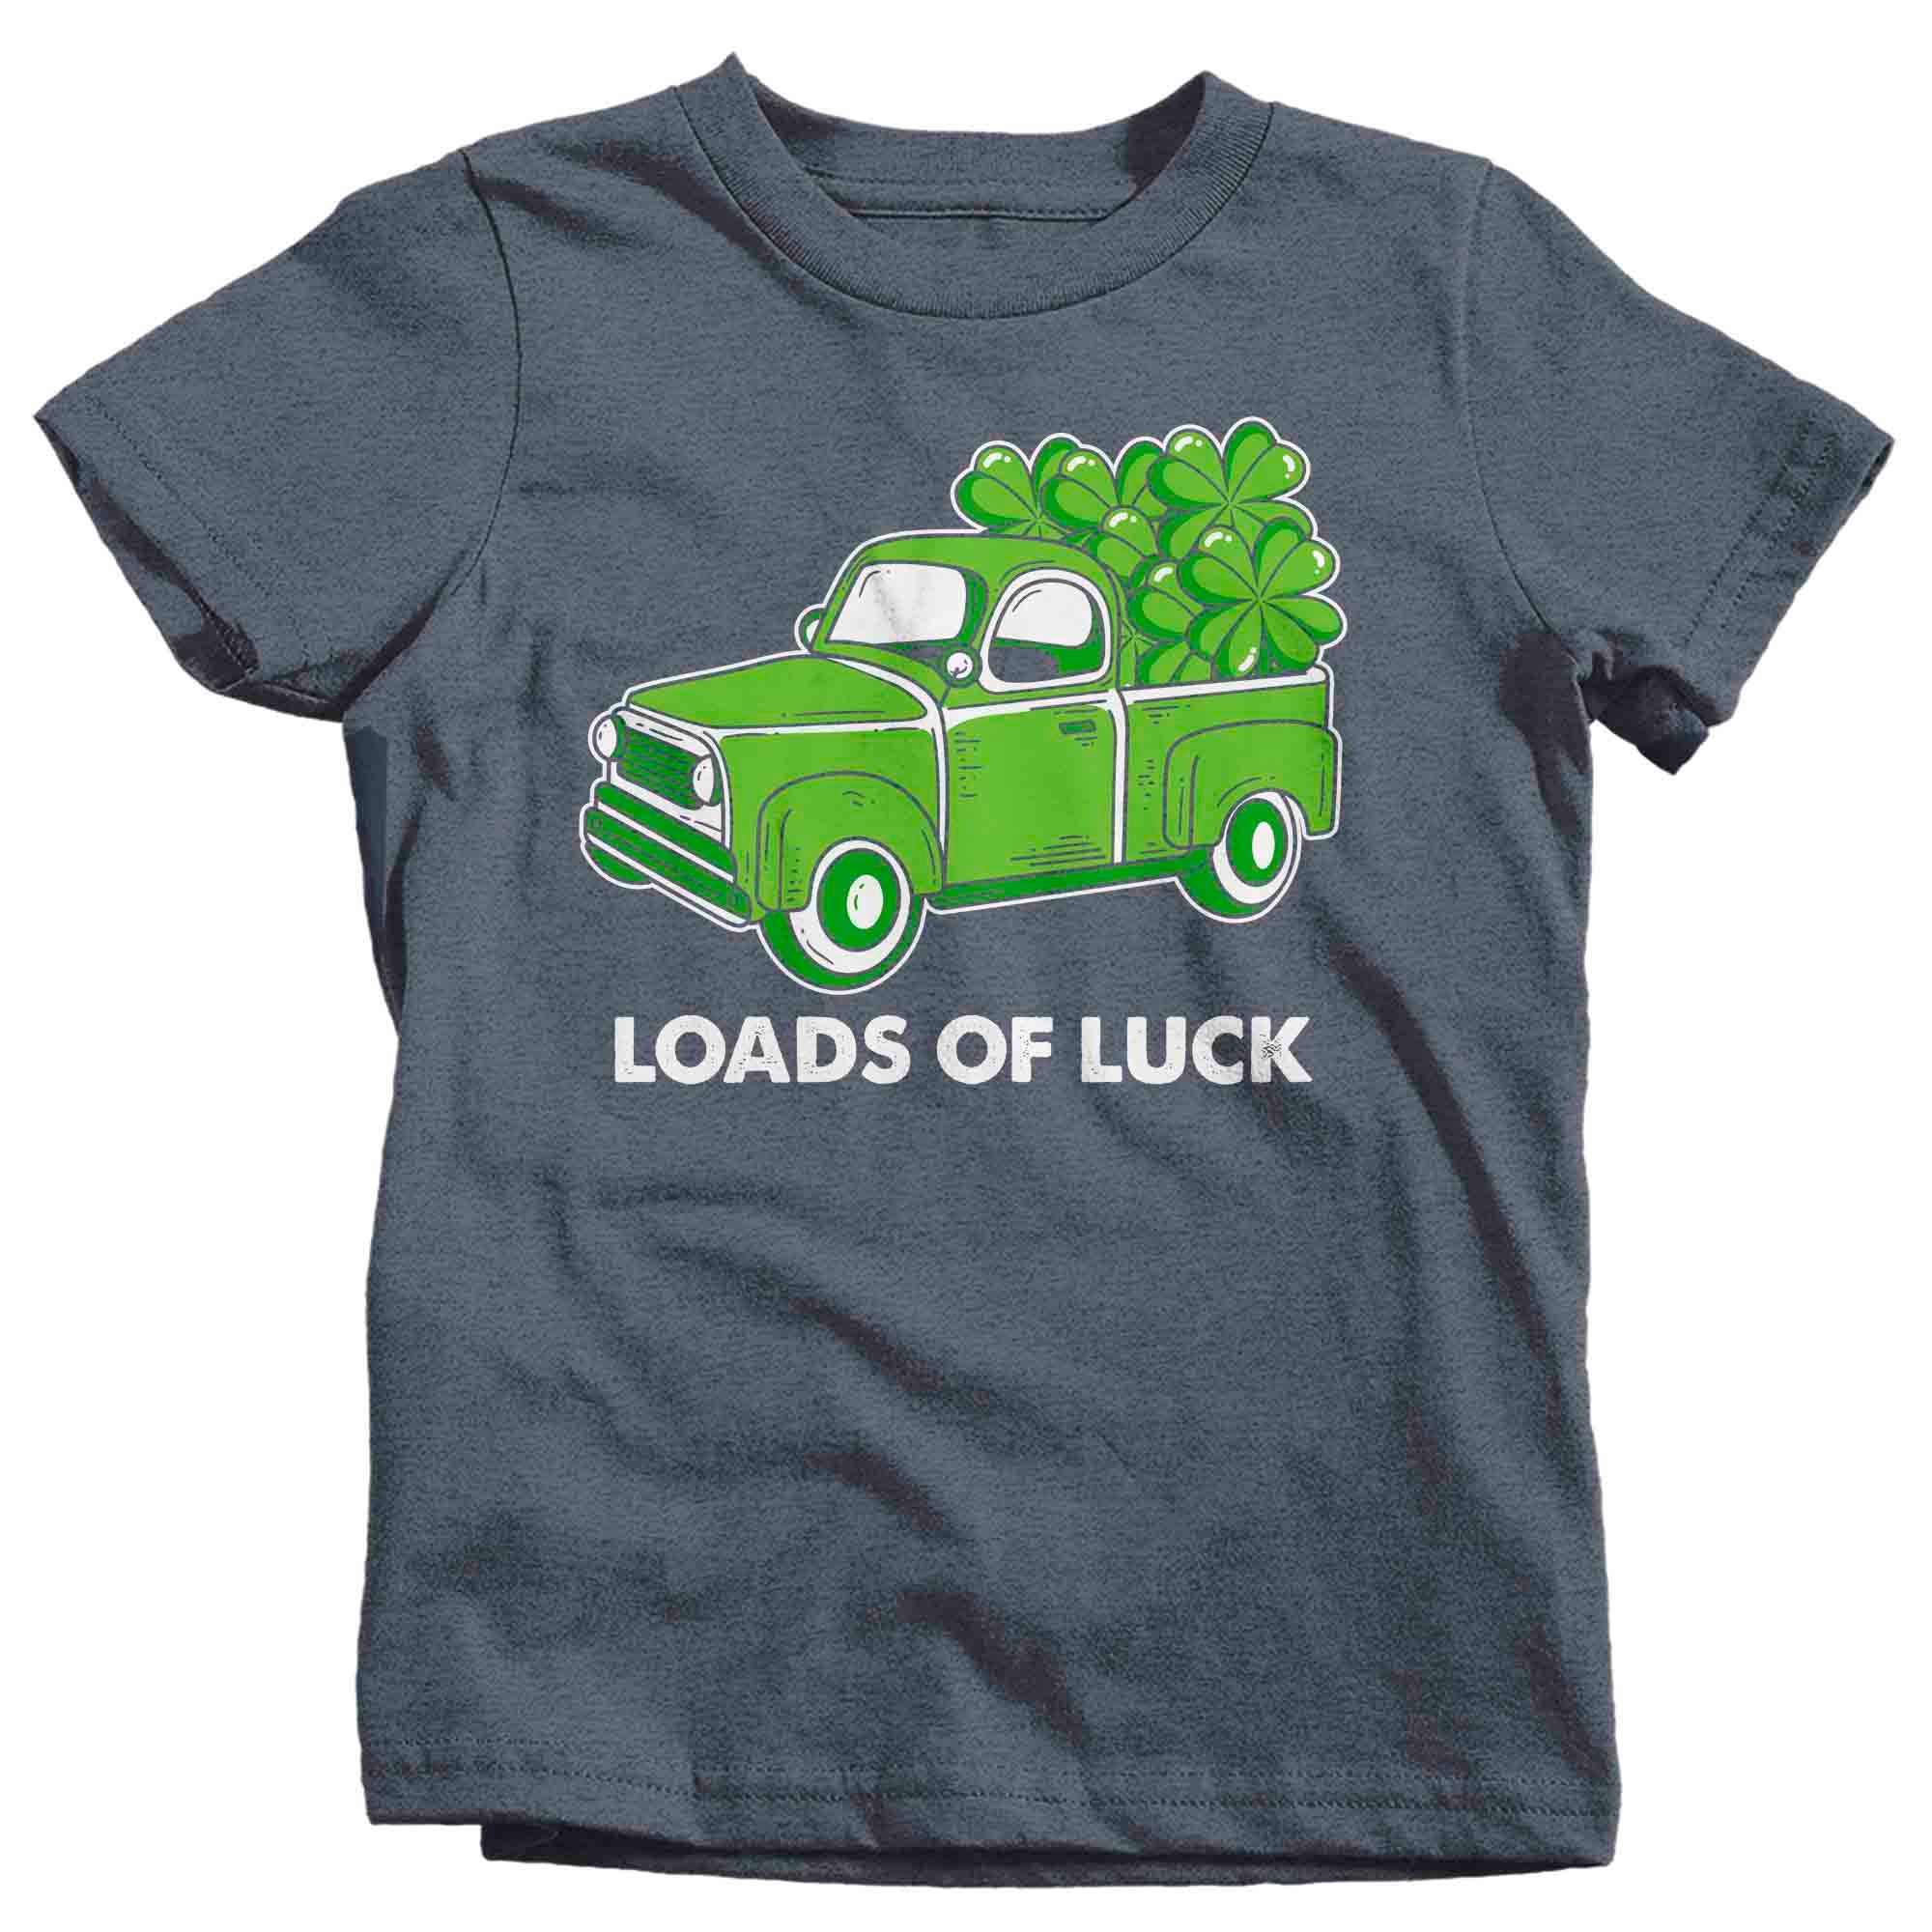 Loads Of Luck St St Patricks Day Tee Unisex Shirt St Patty's Day T Shirt Patrick's T Shirt Loads of Luck